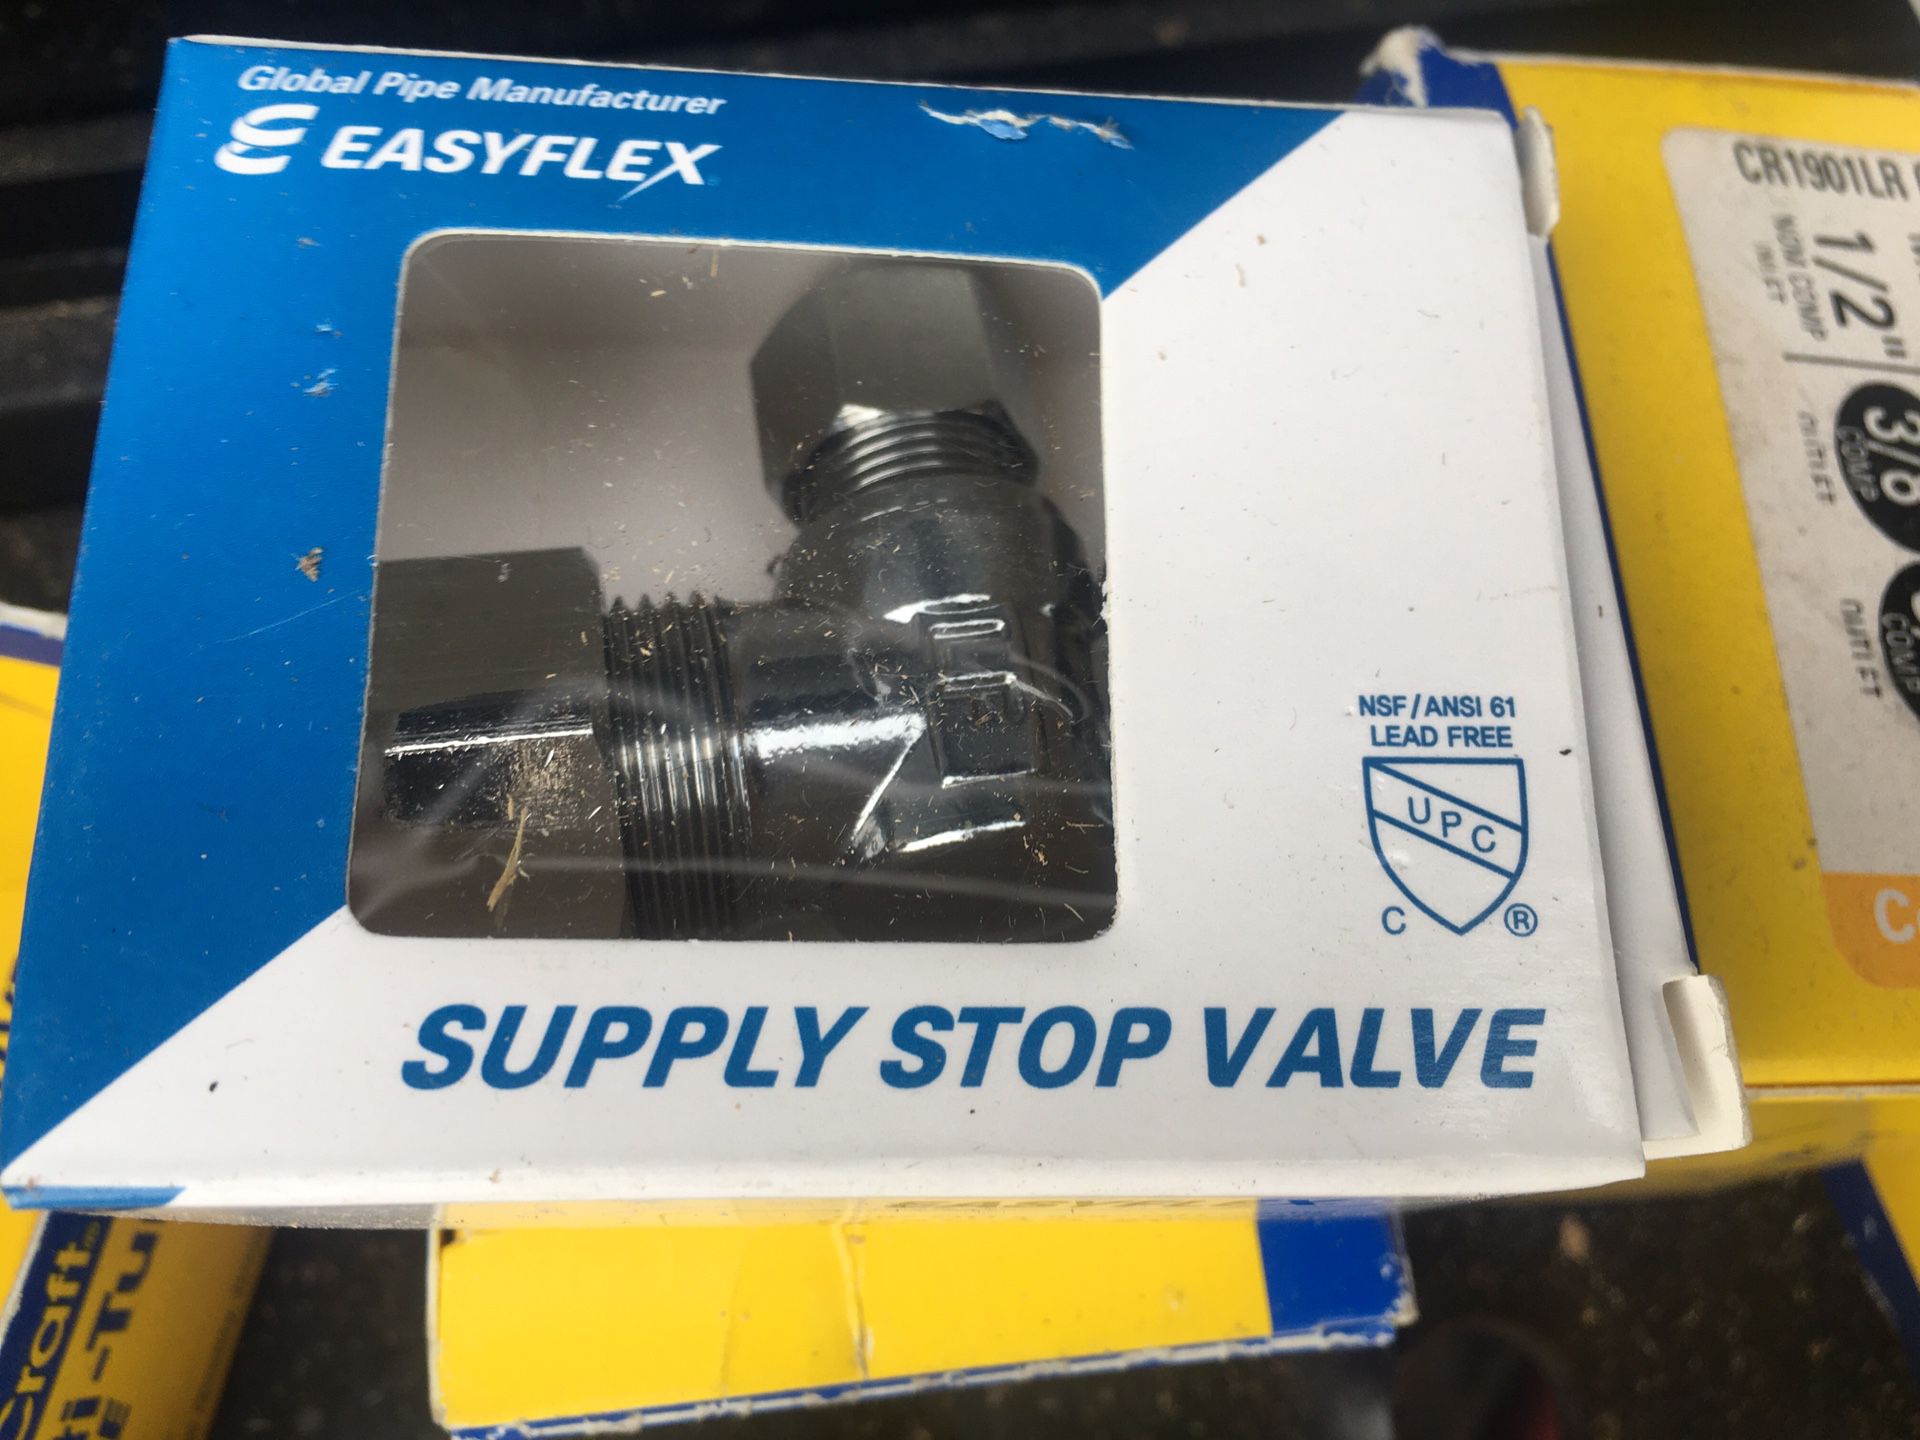 BrassCraft x Easyflex Dual Outlet Supply Stop Valves Plumbing Parts